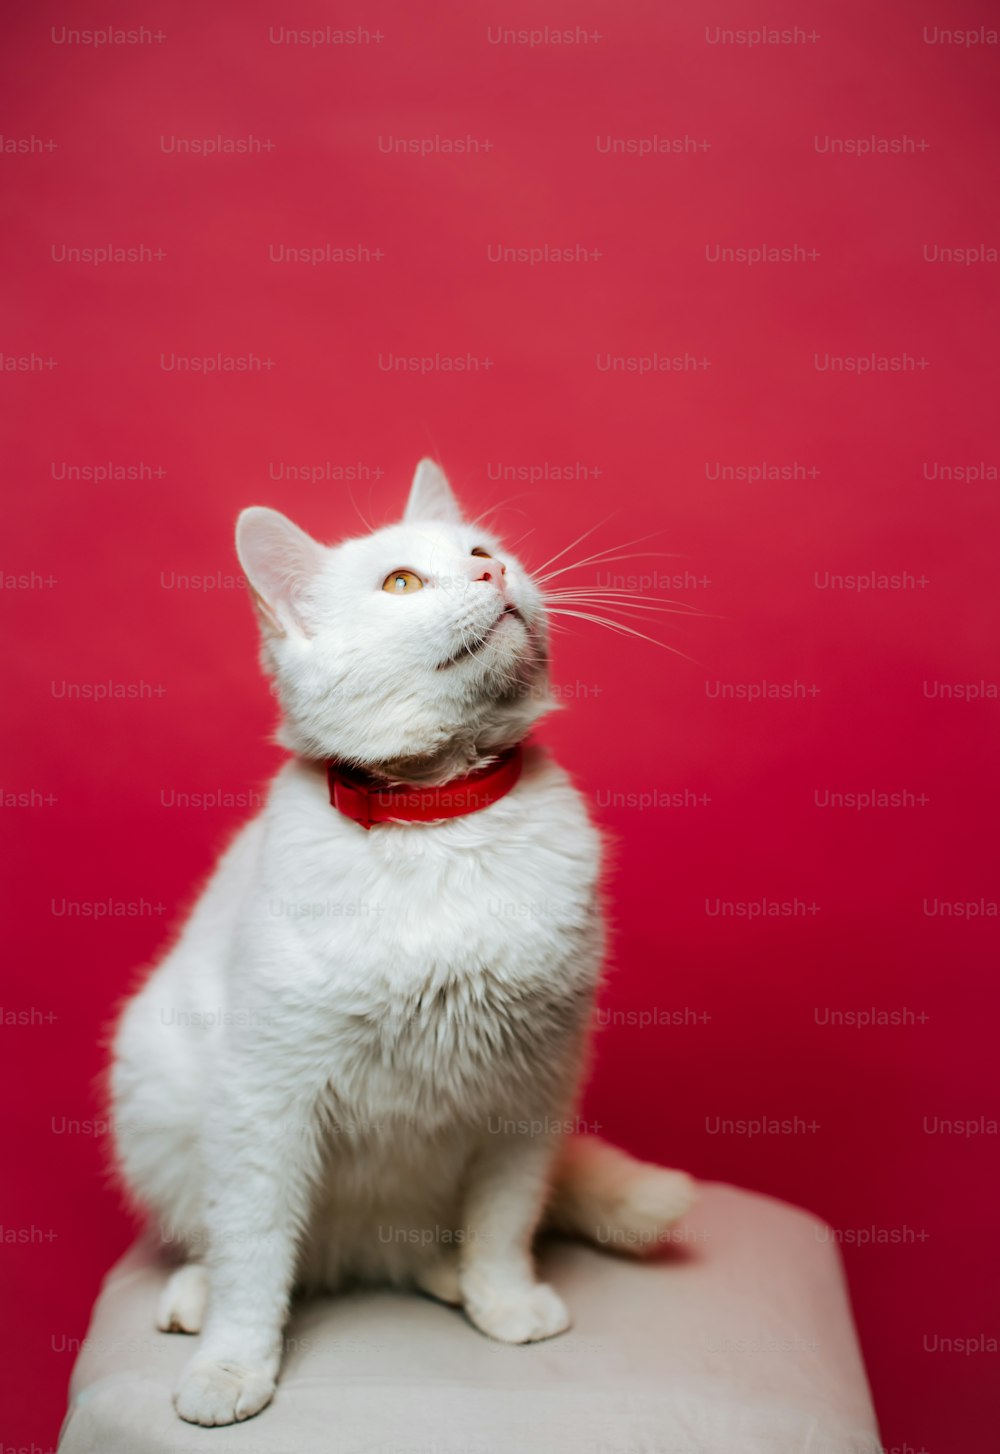 a white cat with a red collar sitting on a cushion